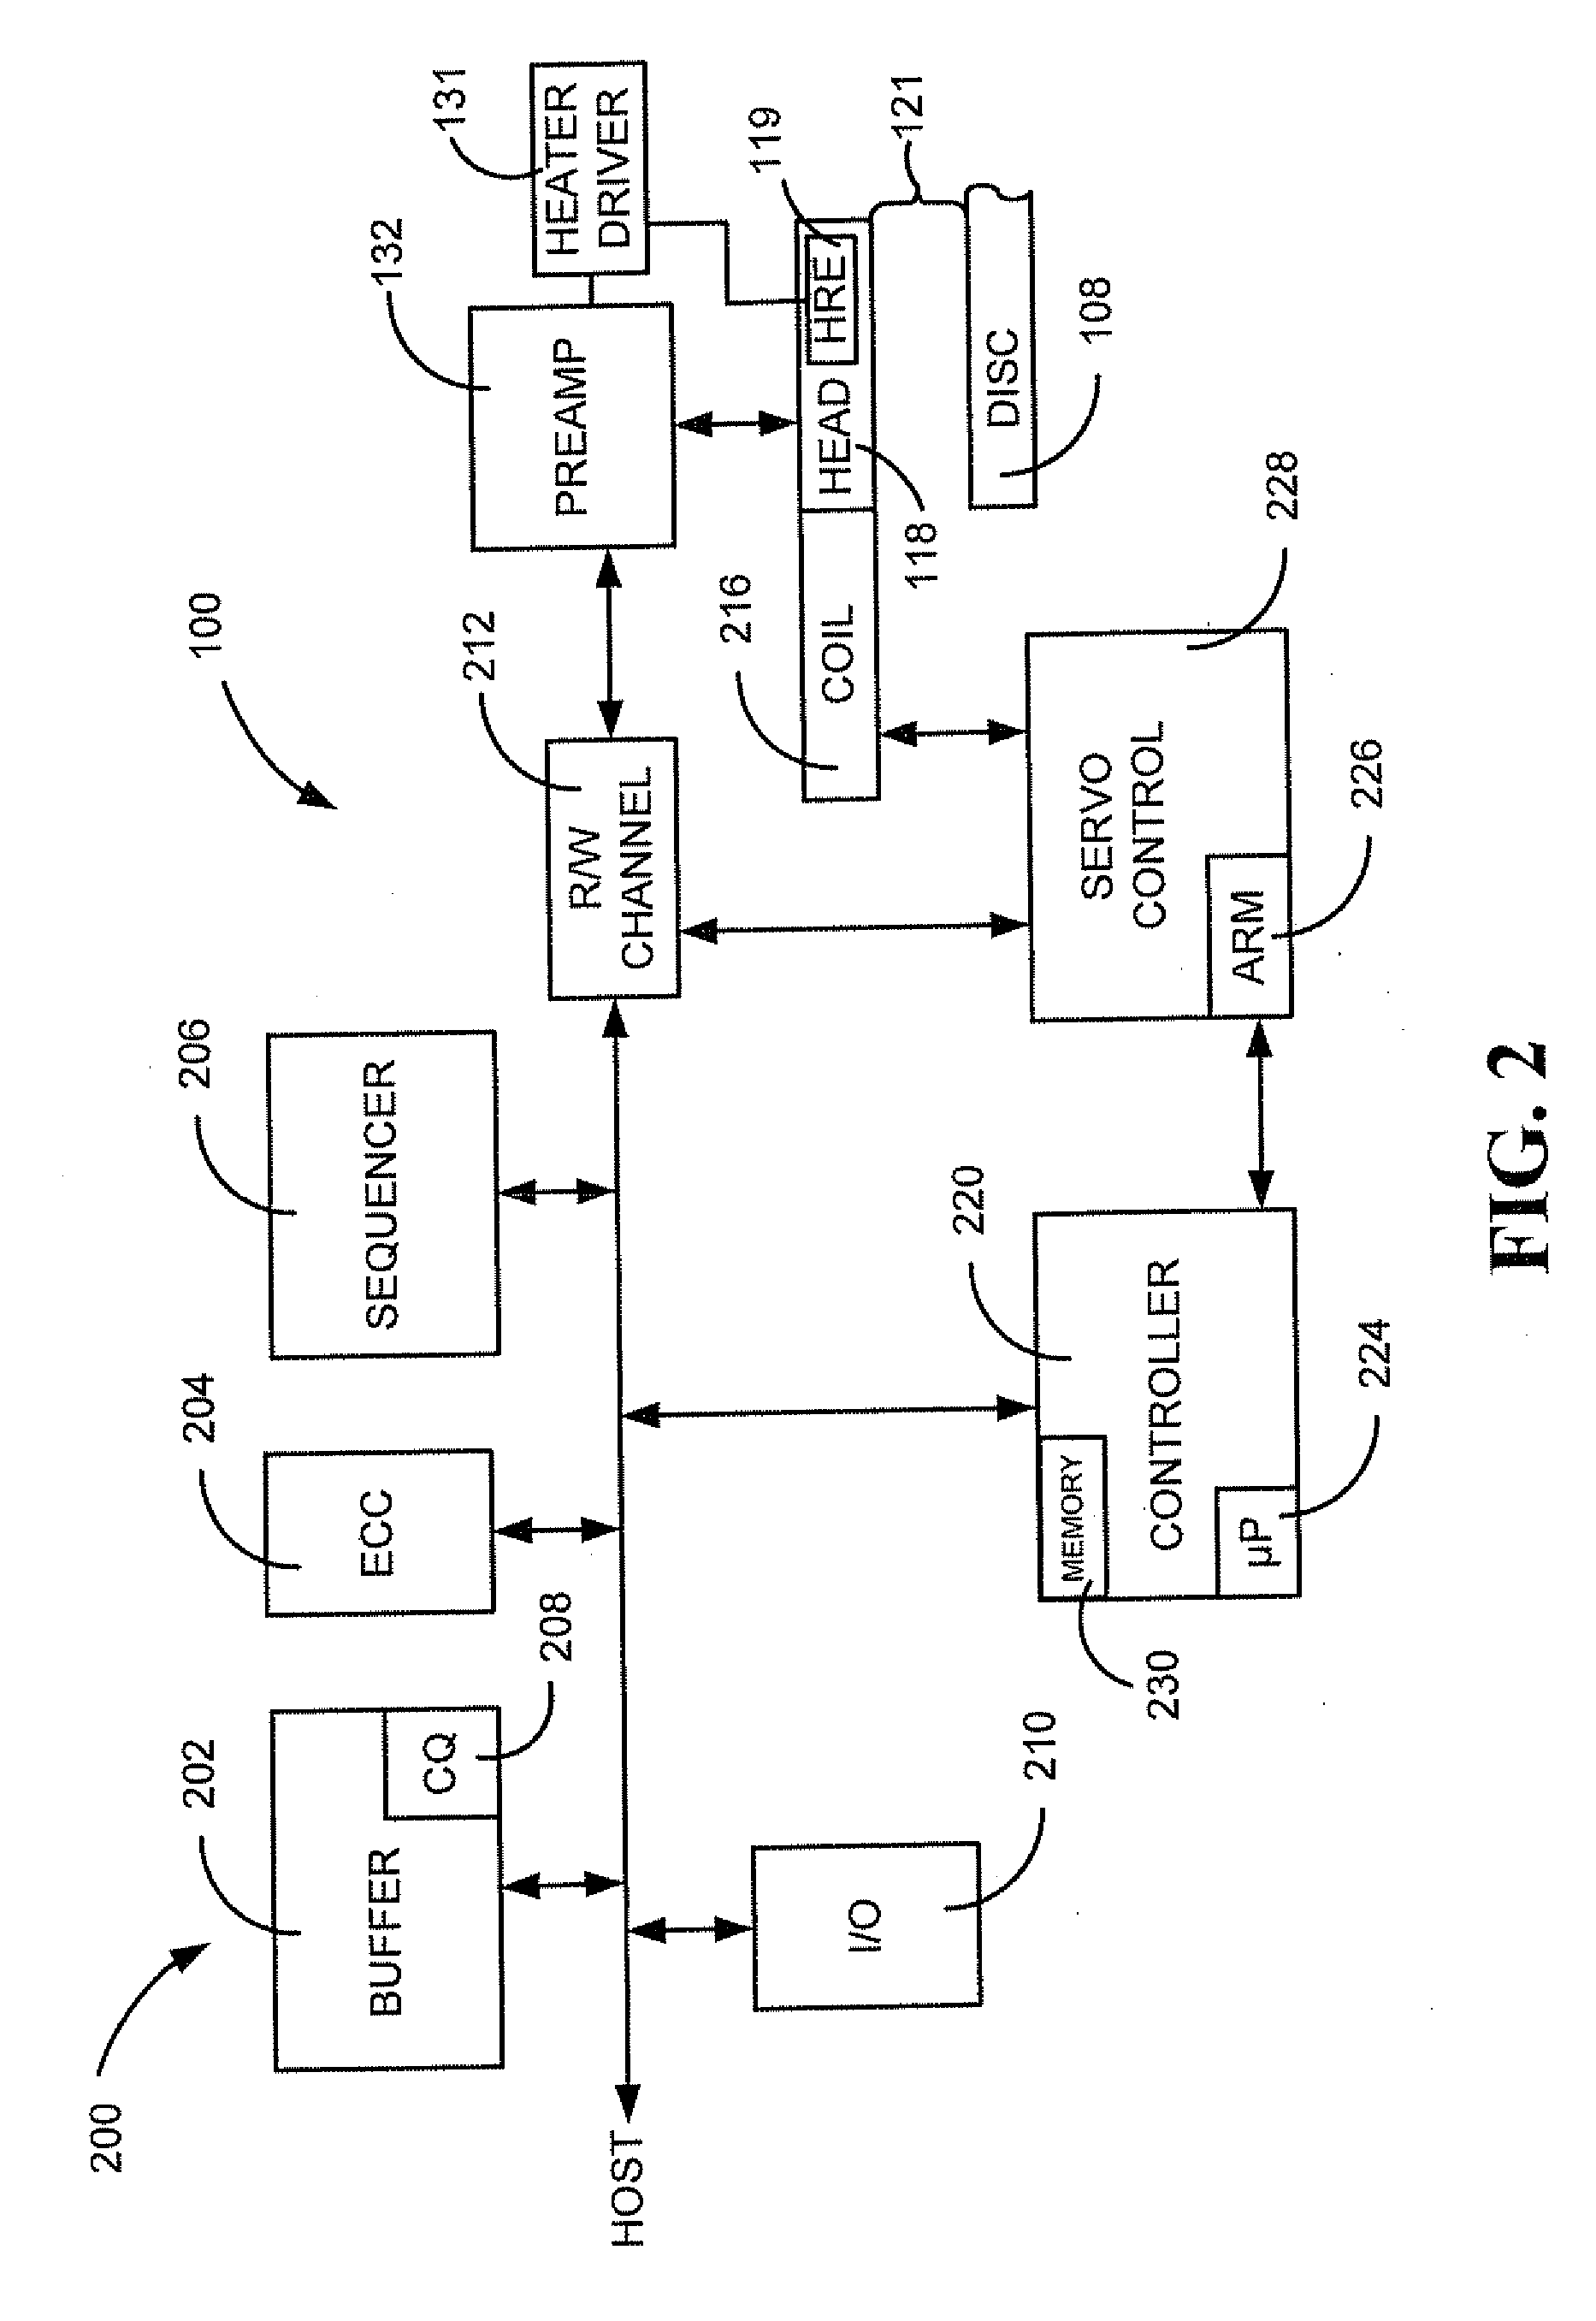 Controlling a heat resistive element with a pulse modulated signal